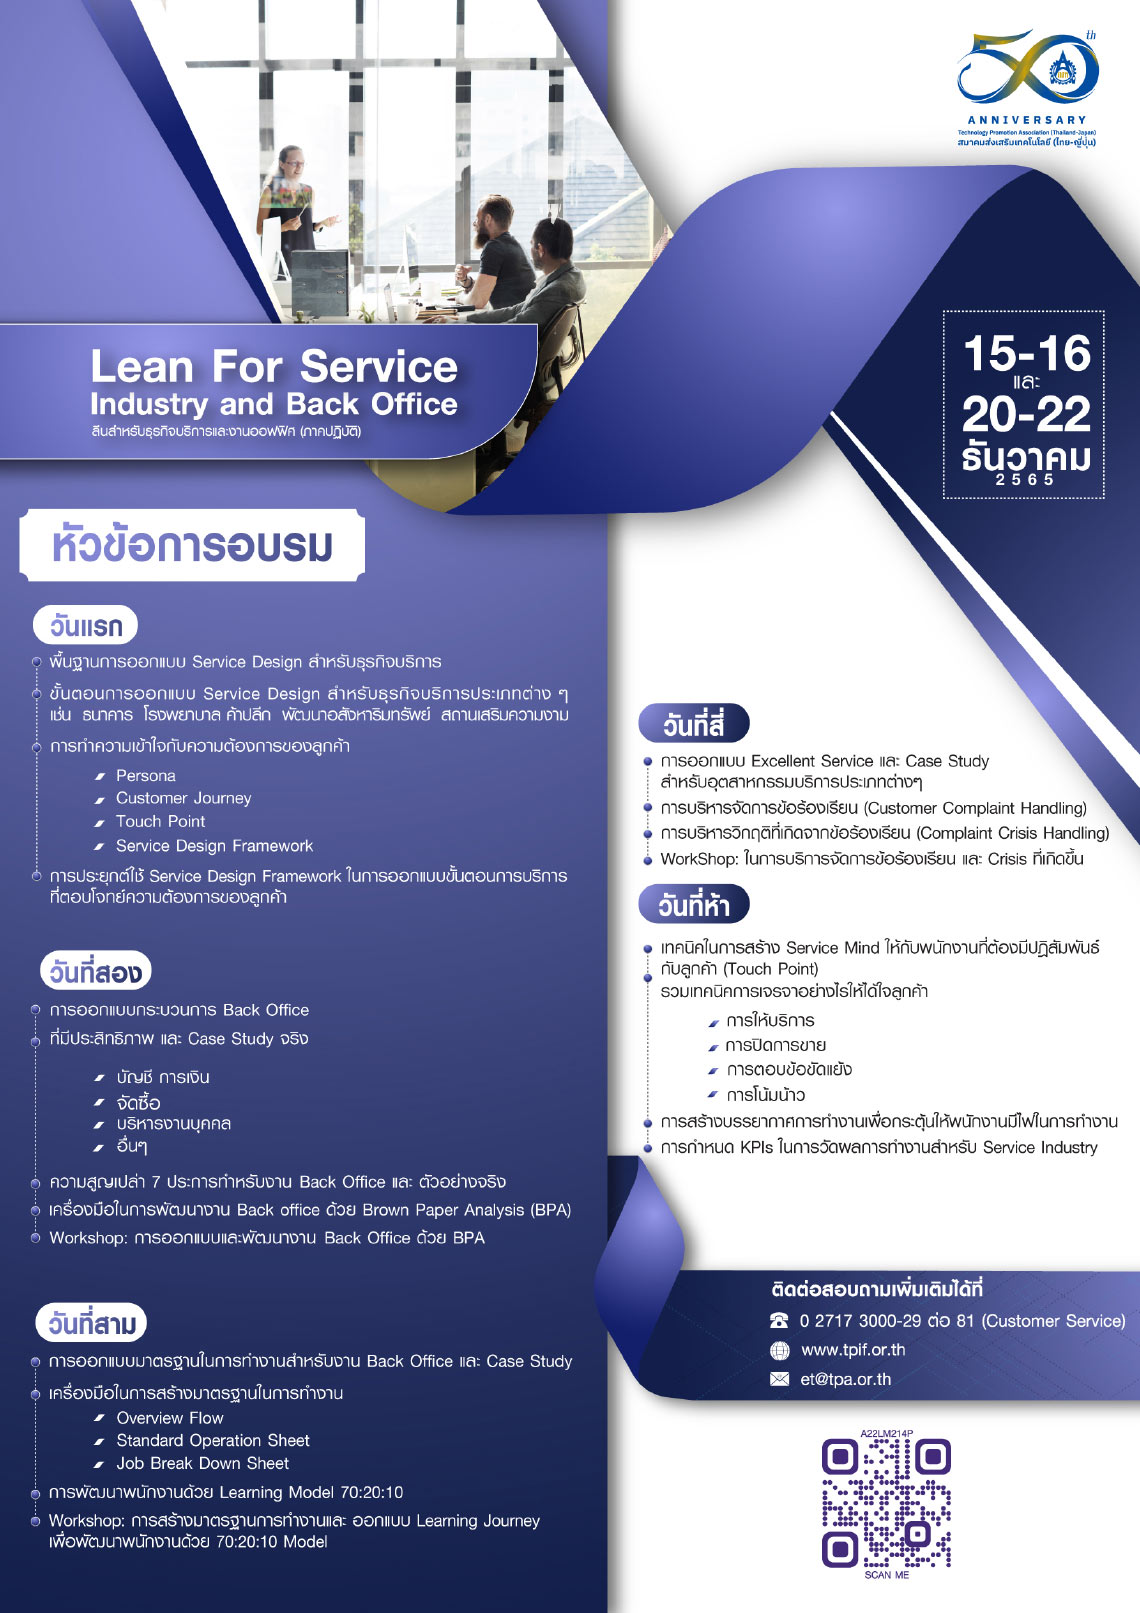 Lean for Service Industry and Back Office ลีนสำหรับธุรกิจบริการและงานออฟฟิศ